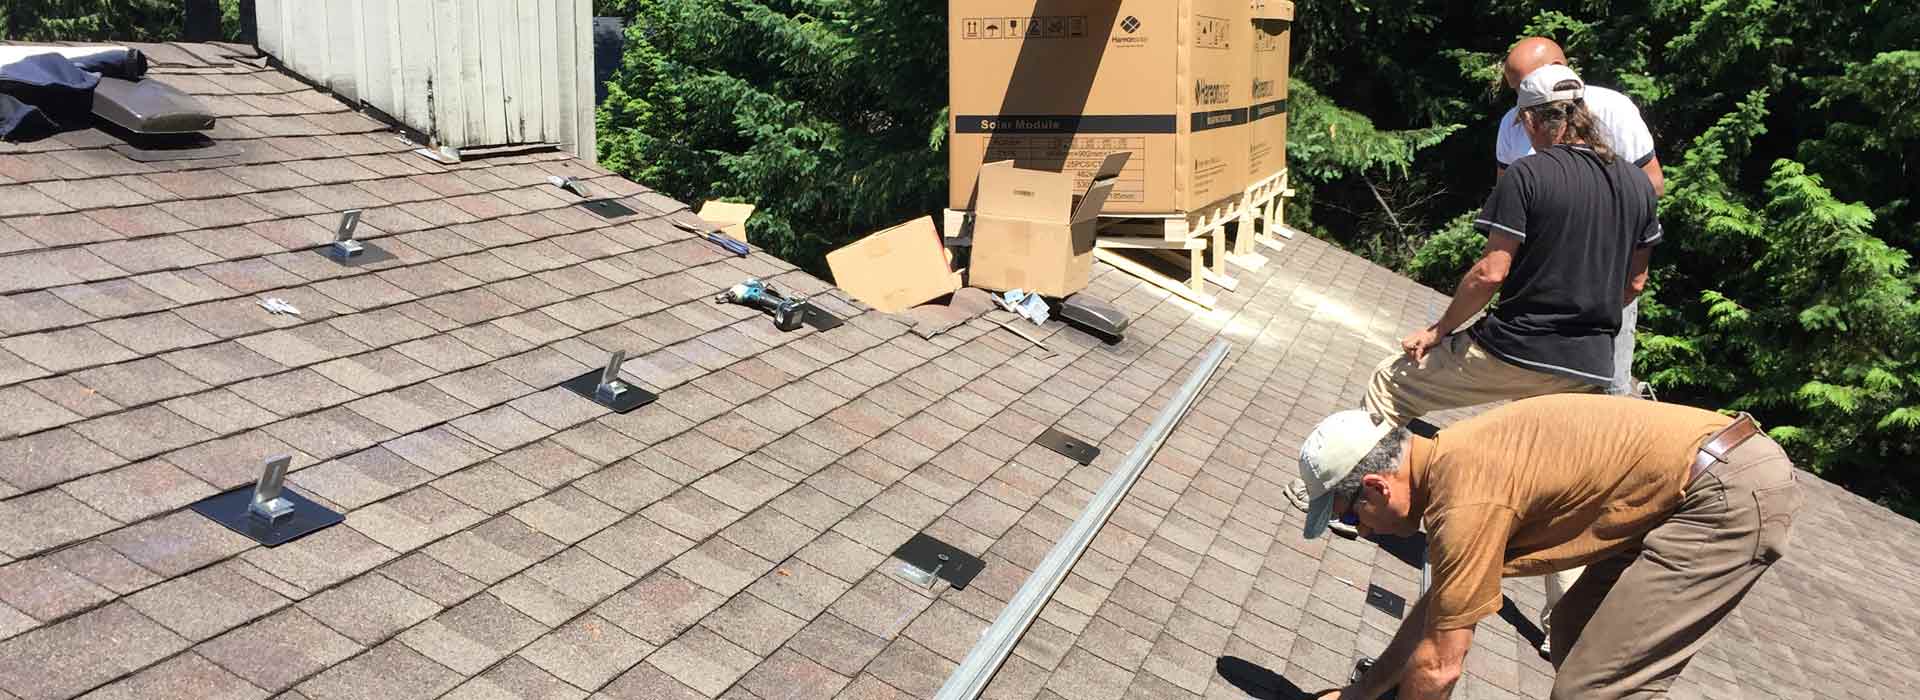 Is It Okay to Attach Accessories to a Shingle Roof?